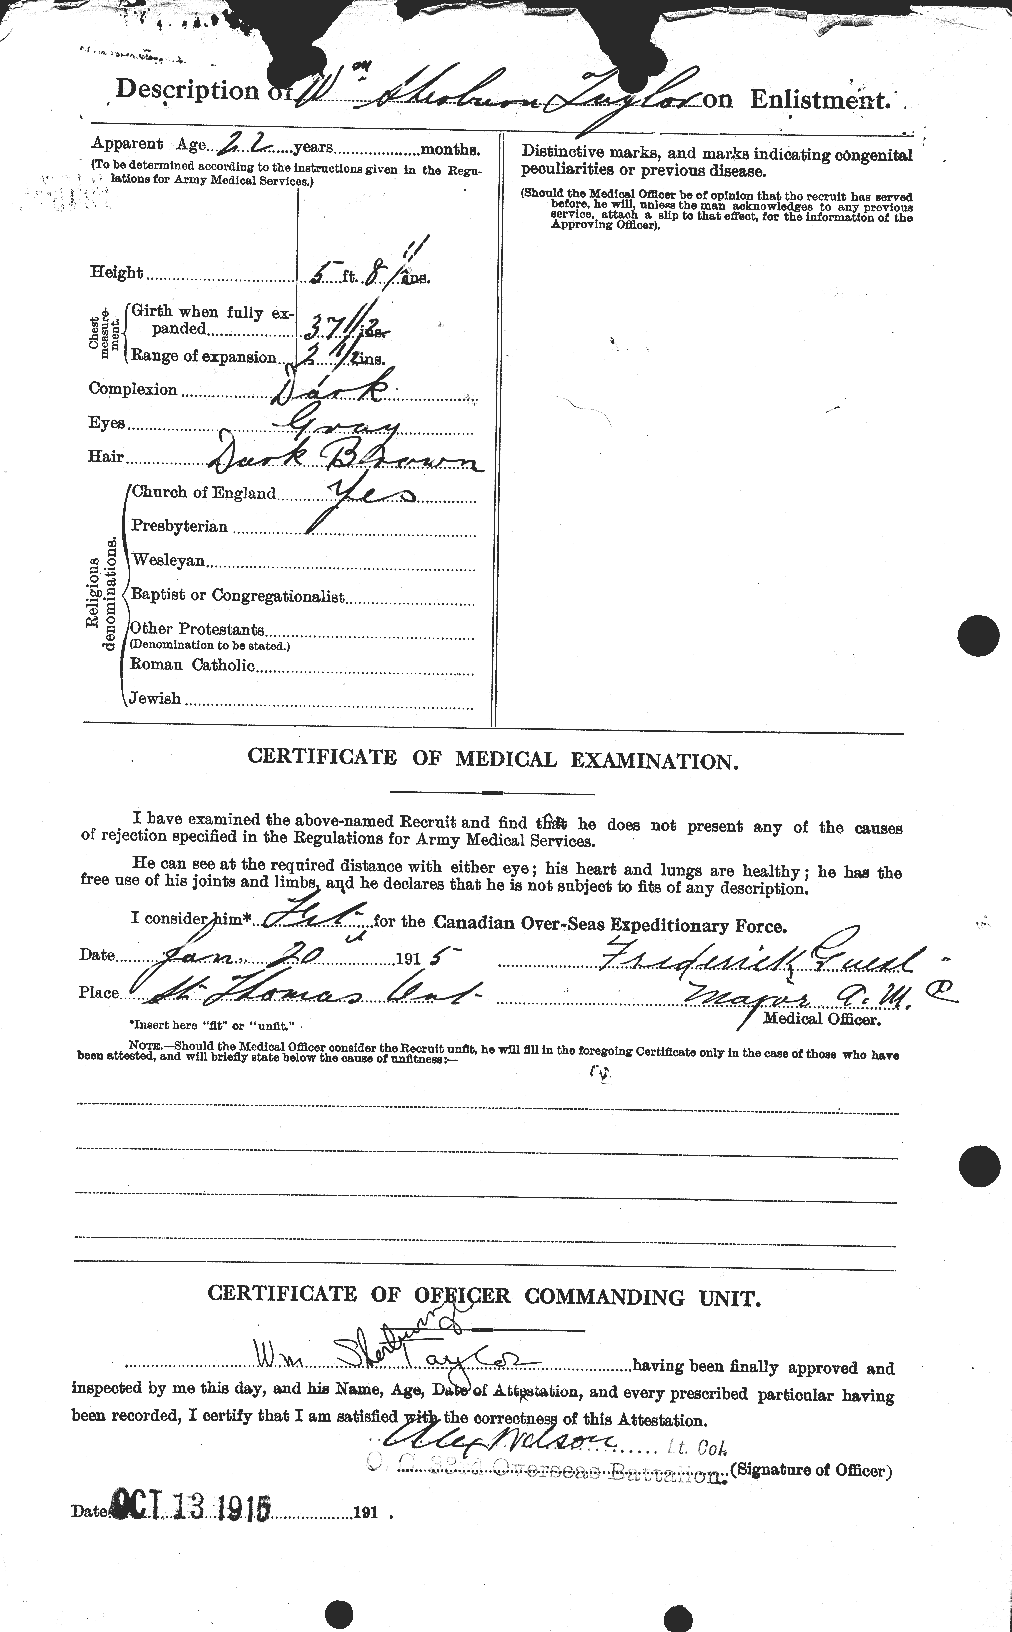 Personnel Records of the First World War - CEF 628347b